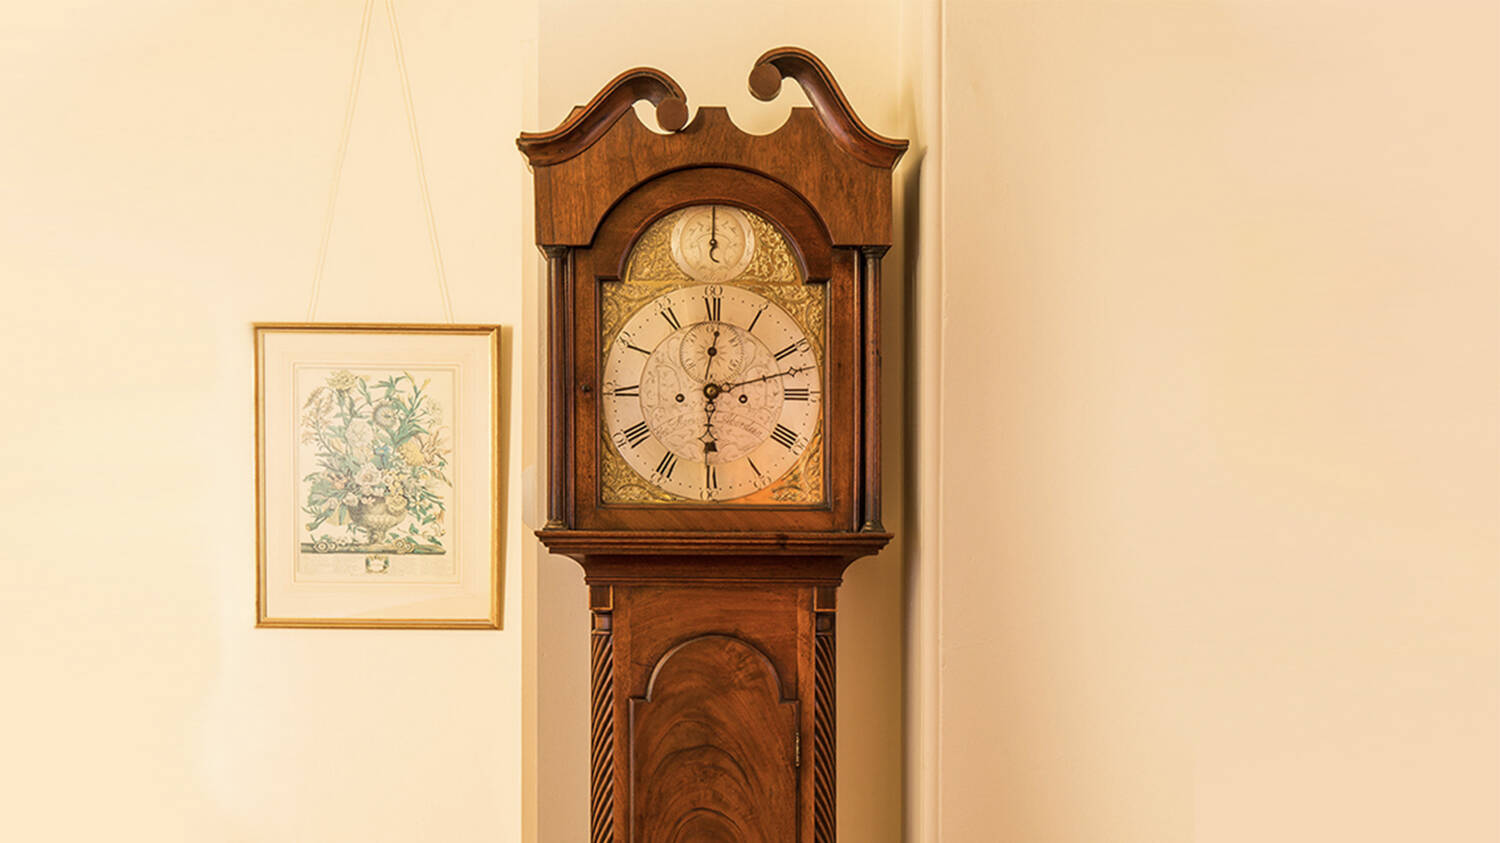 A close-up of the top half of a wooden longcase clock, standing in front of a plain wall next to a framed picture of some flowers.